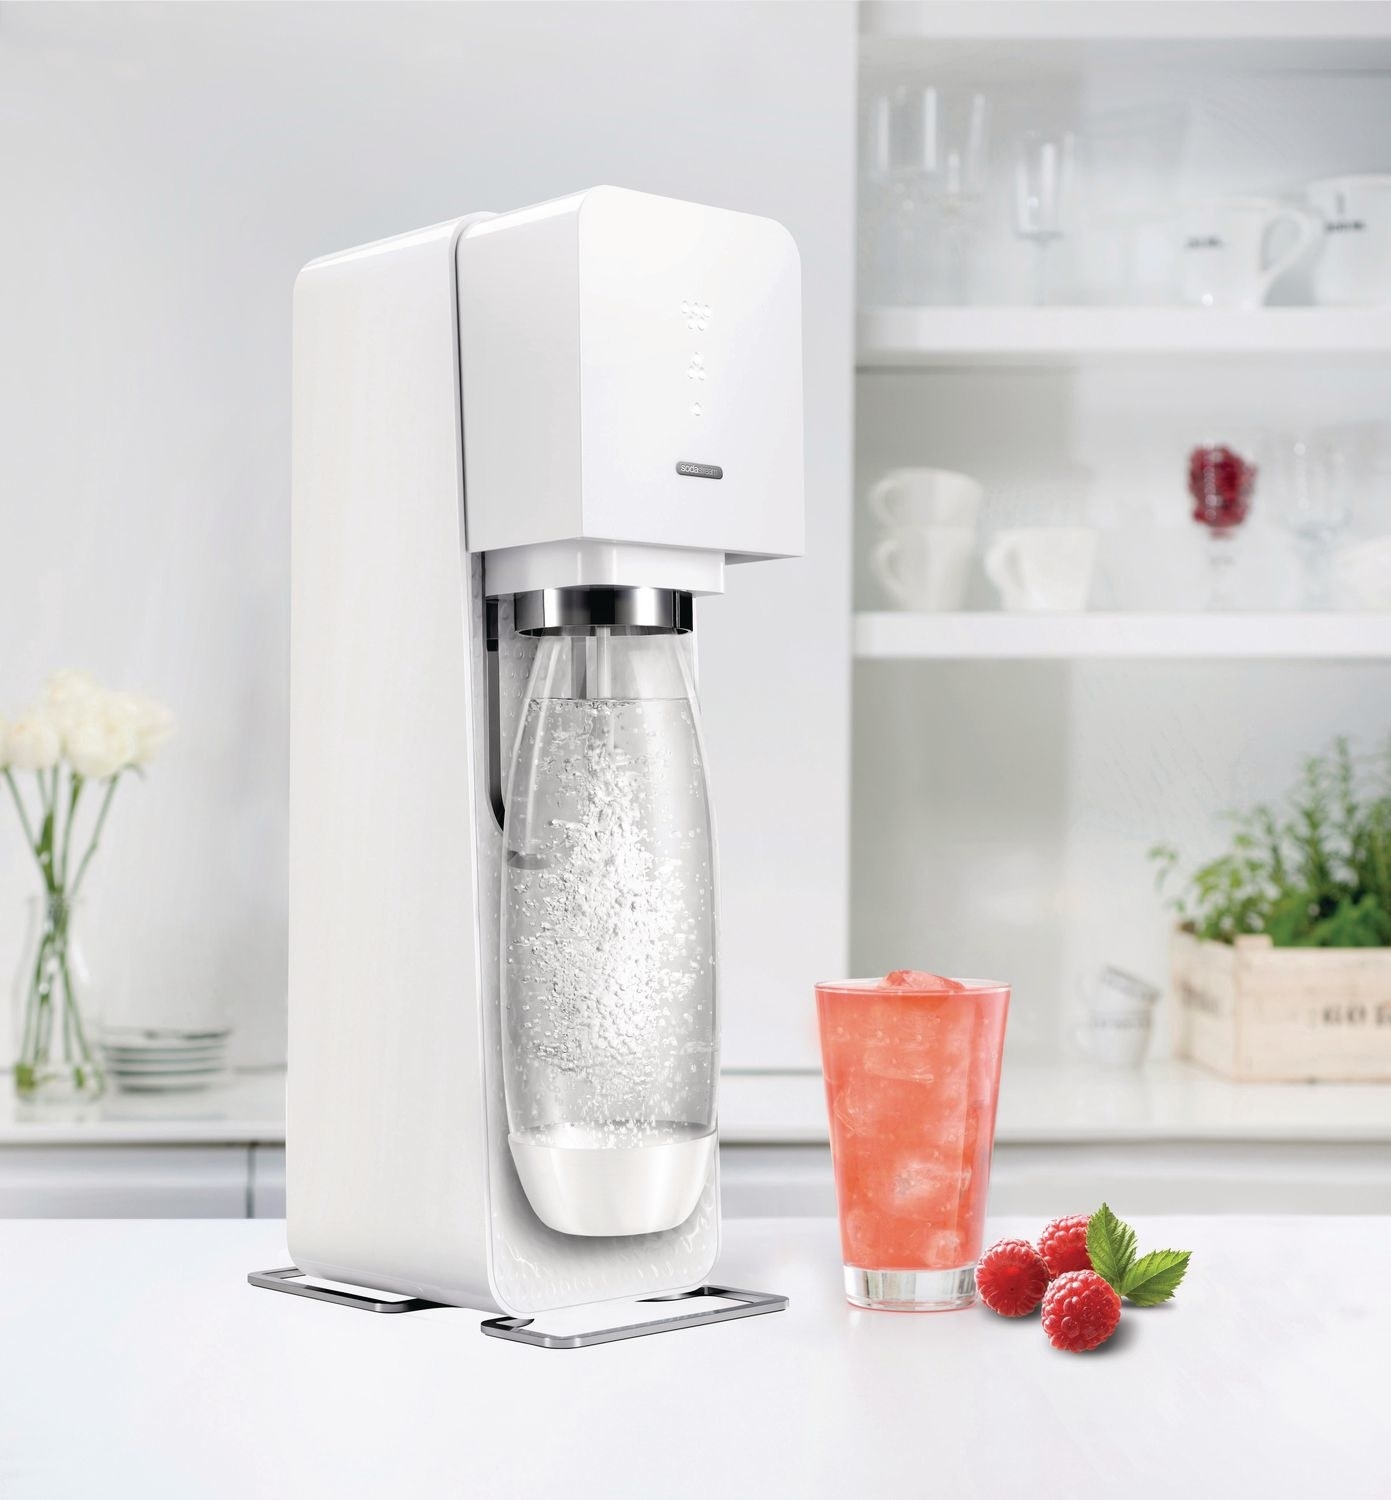 the sodastream on a table with a glass of raspberry drink next to it